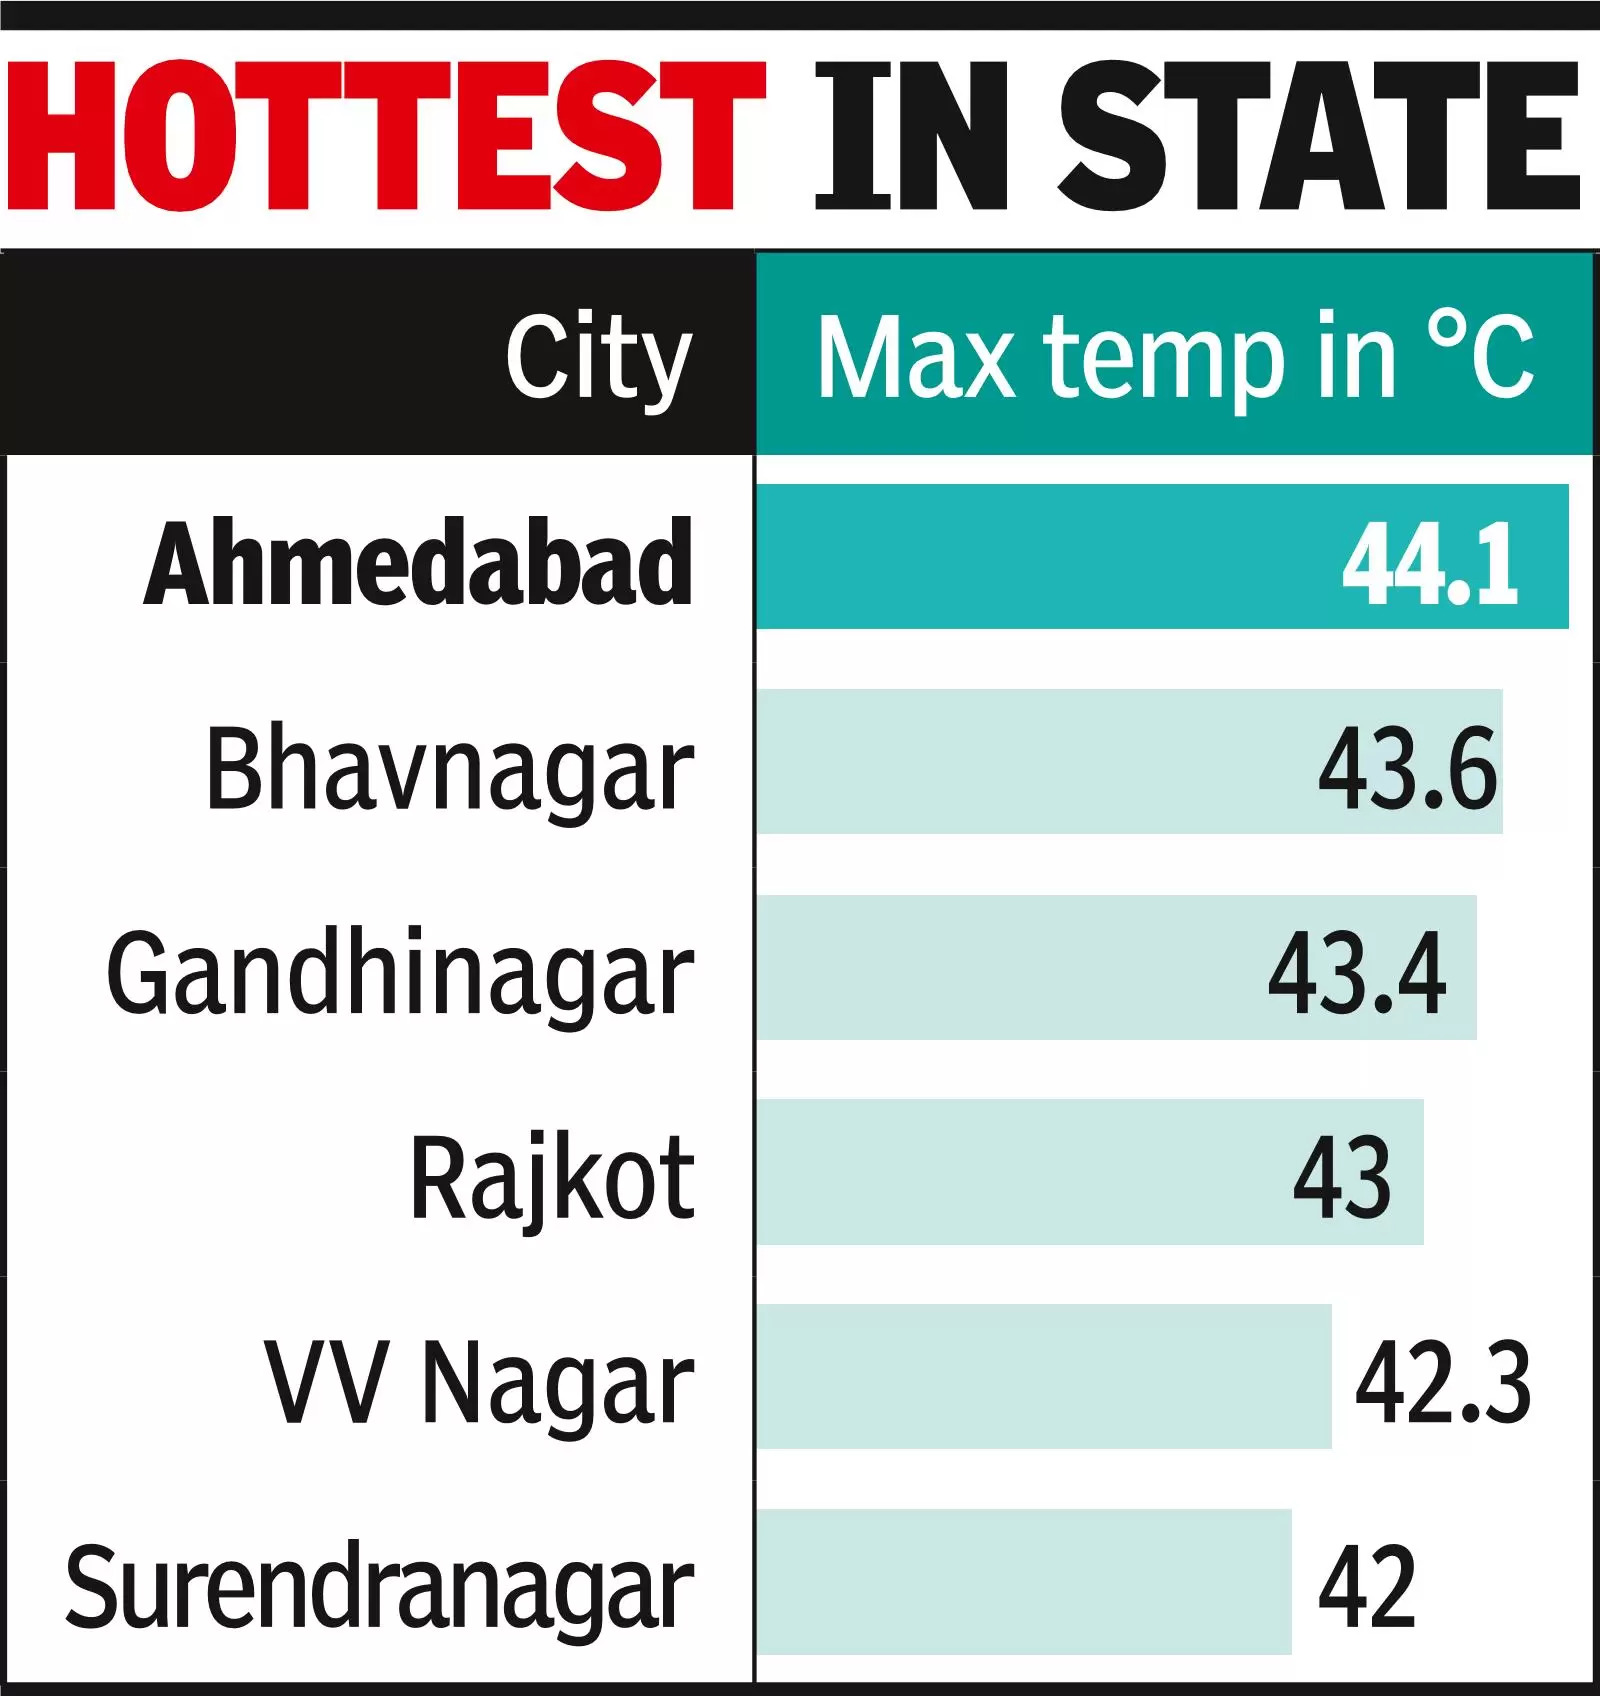 At 44.1ºC, A’bad gets some respite from heat